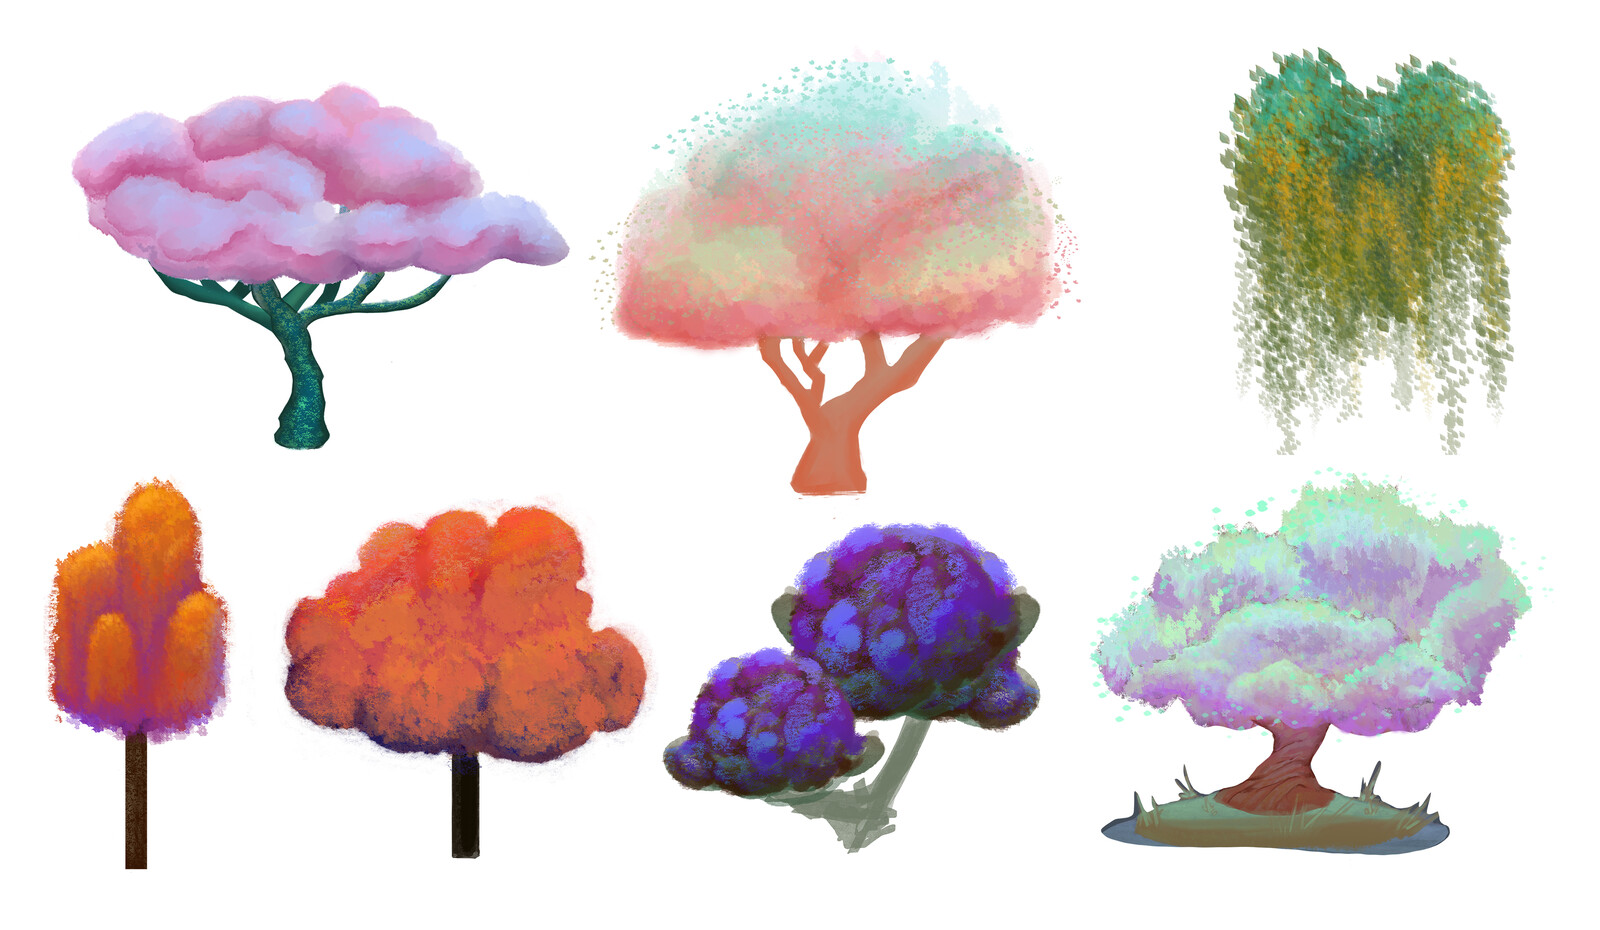 Funny looking trees